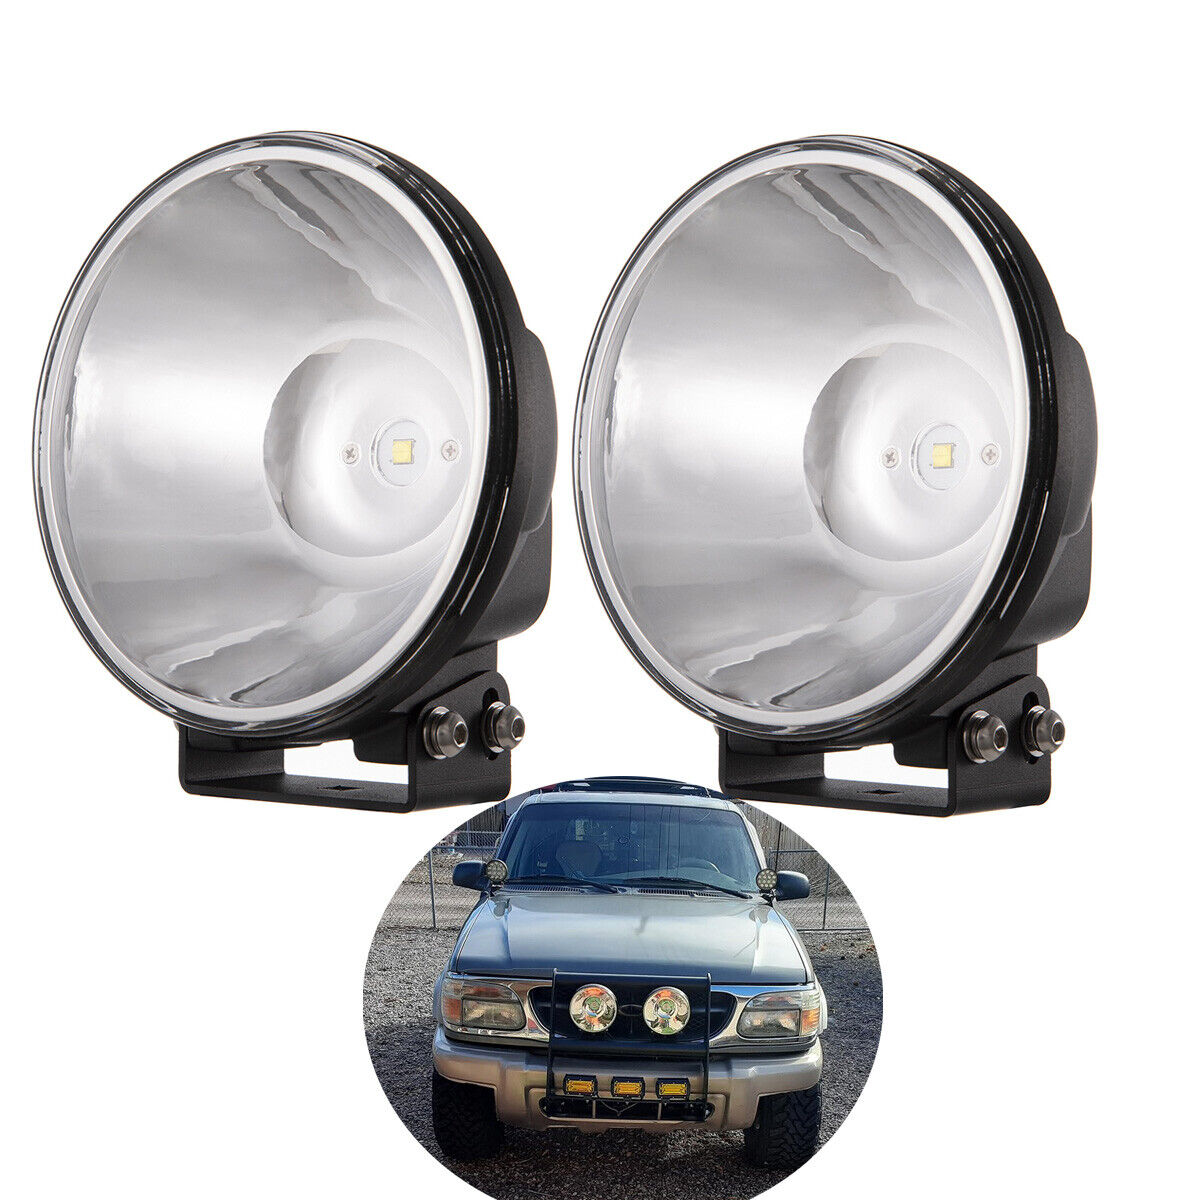 2x 7 inch 70W Spot Round LED Driving Light Motorcycle Truck Off-Road Headlight 